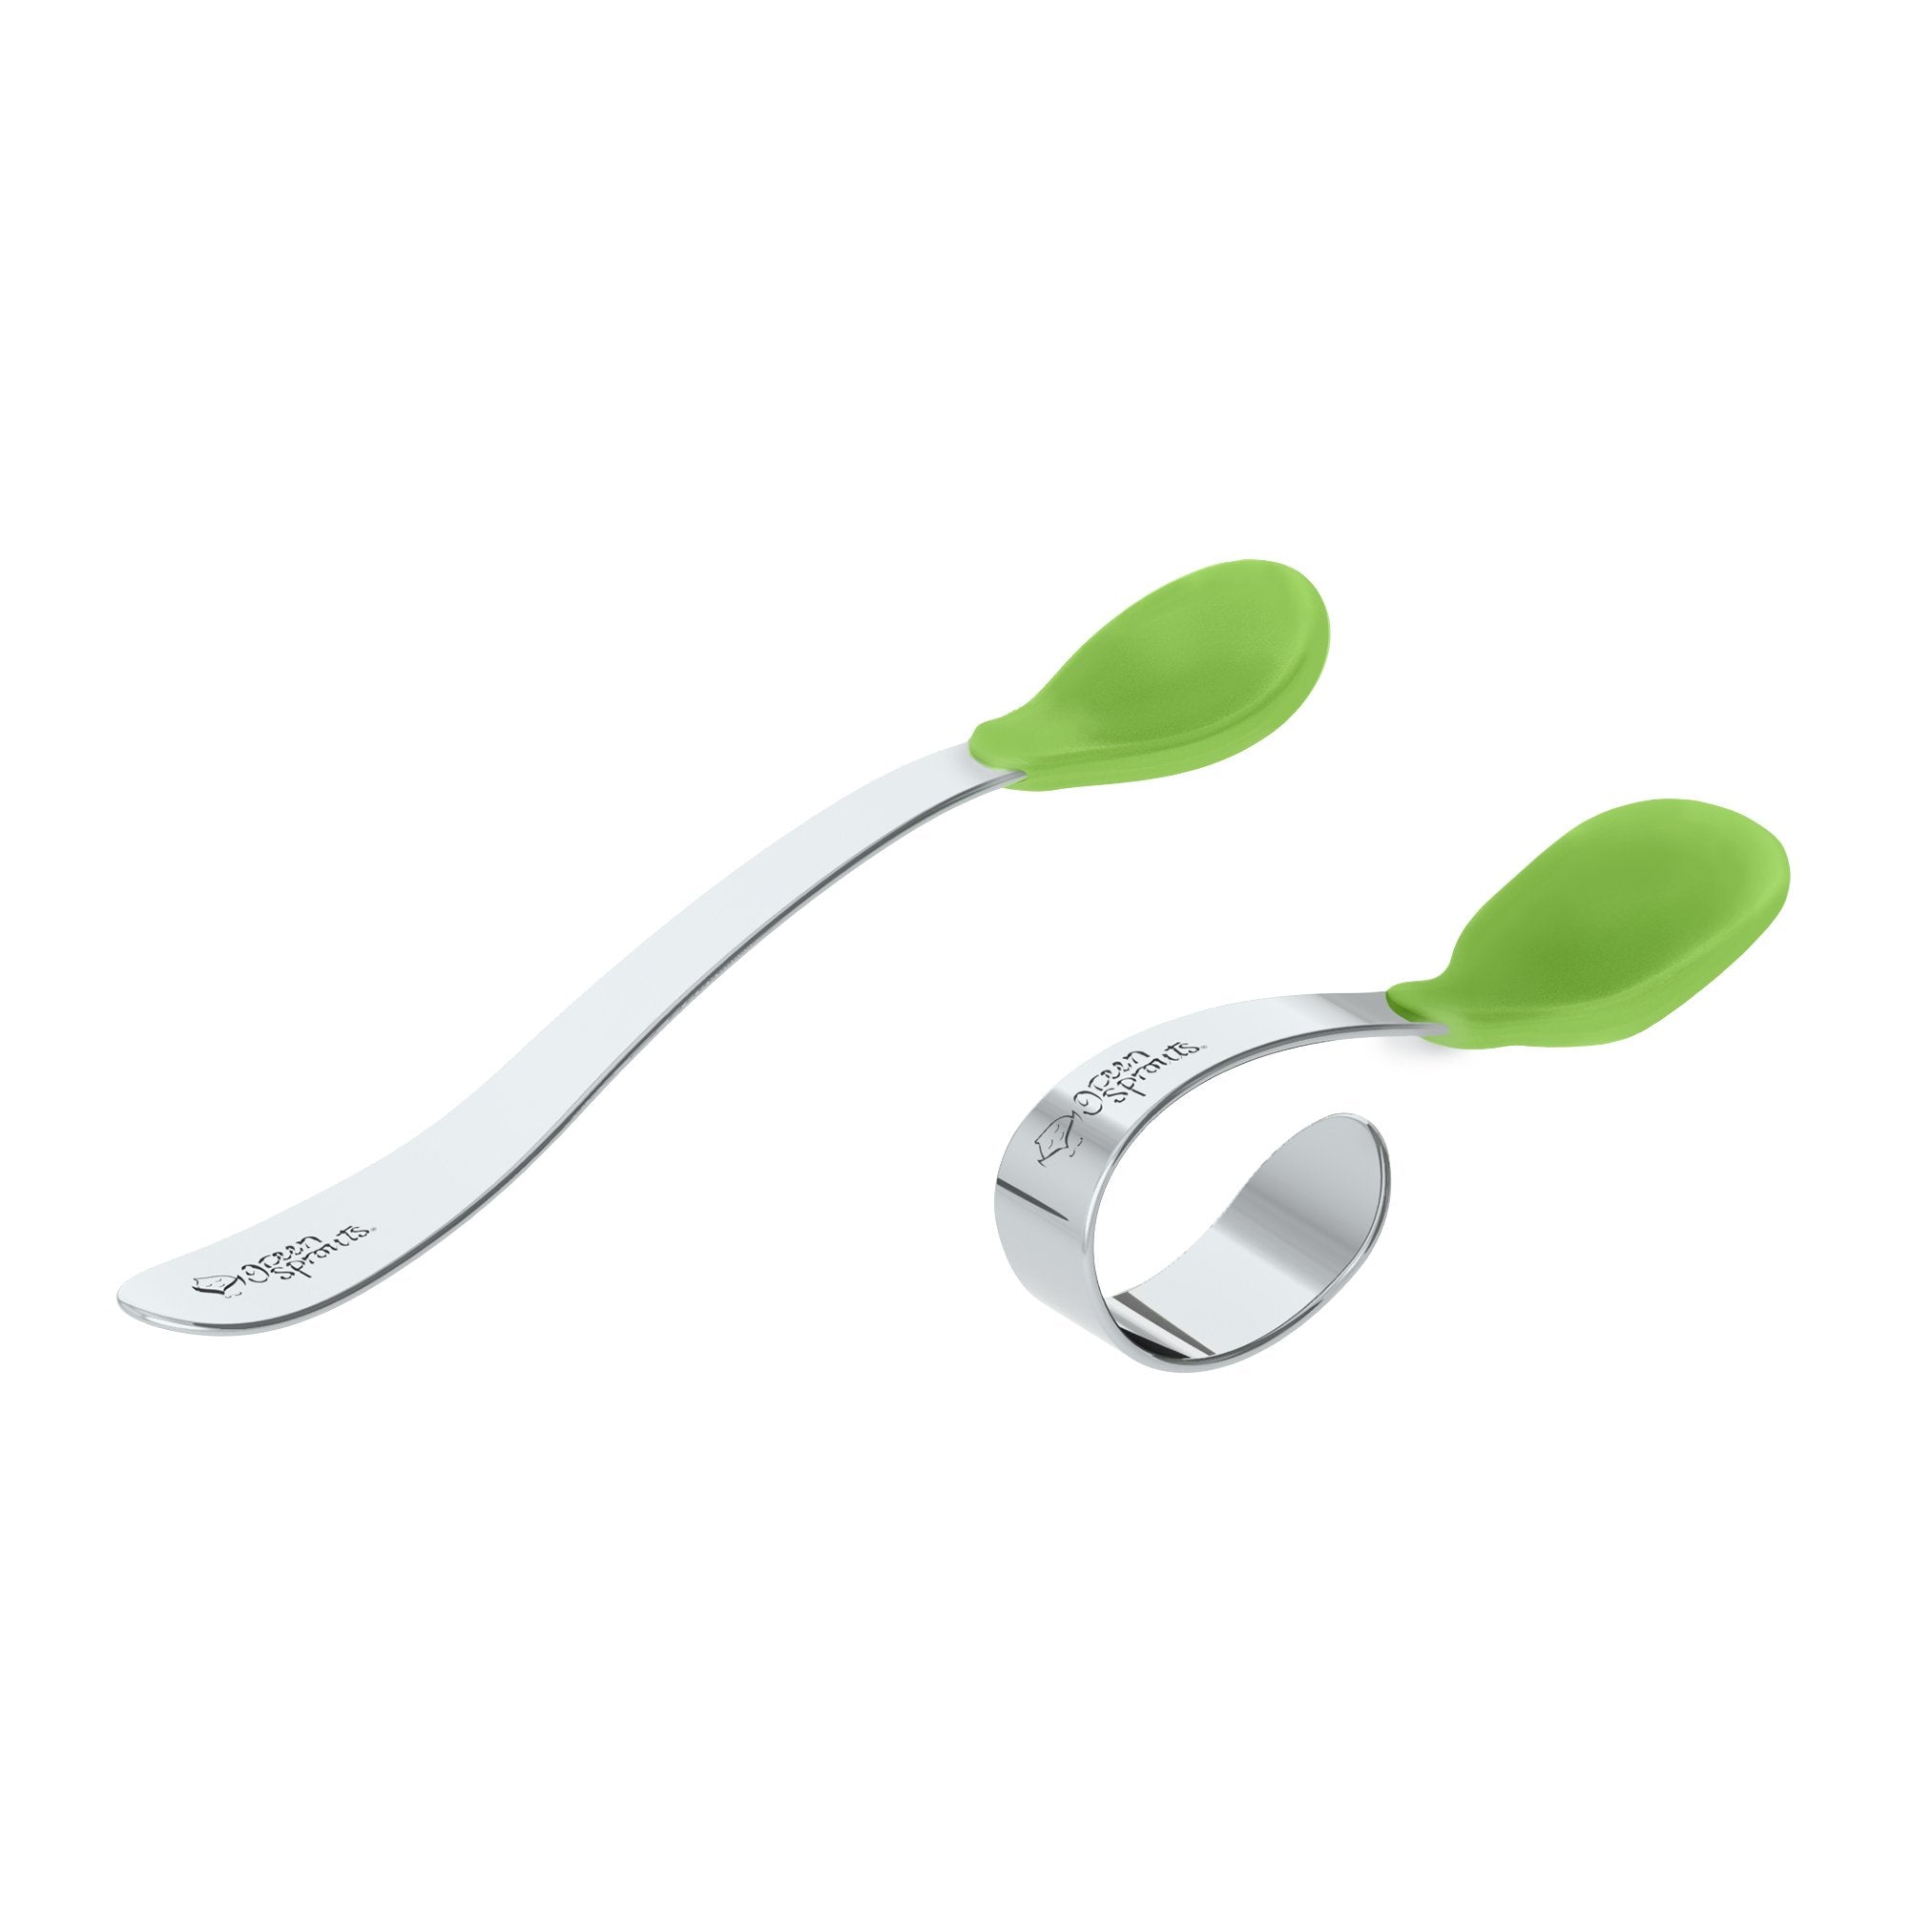 Right-Handed Curved Baby Spoons for Toddler Self Feeding (2-Pack